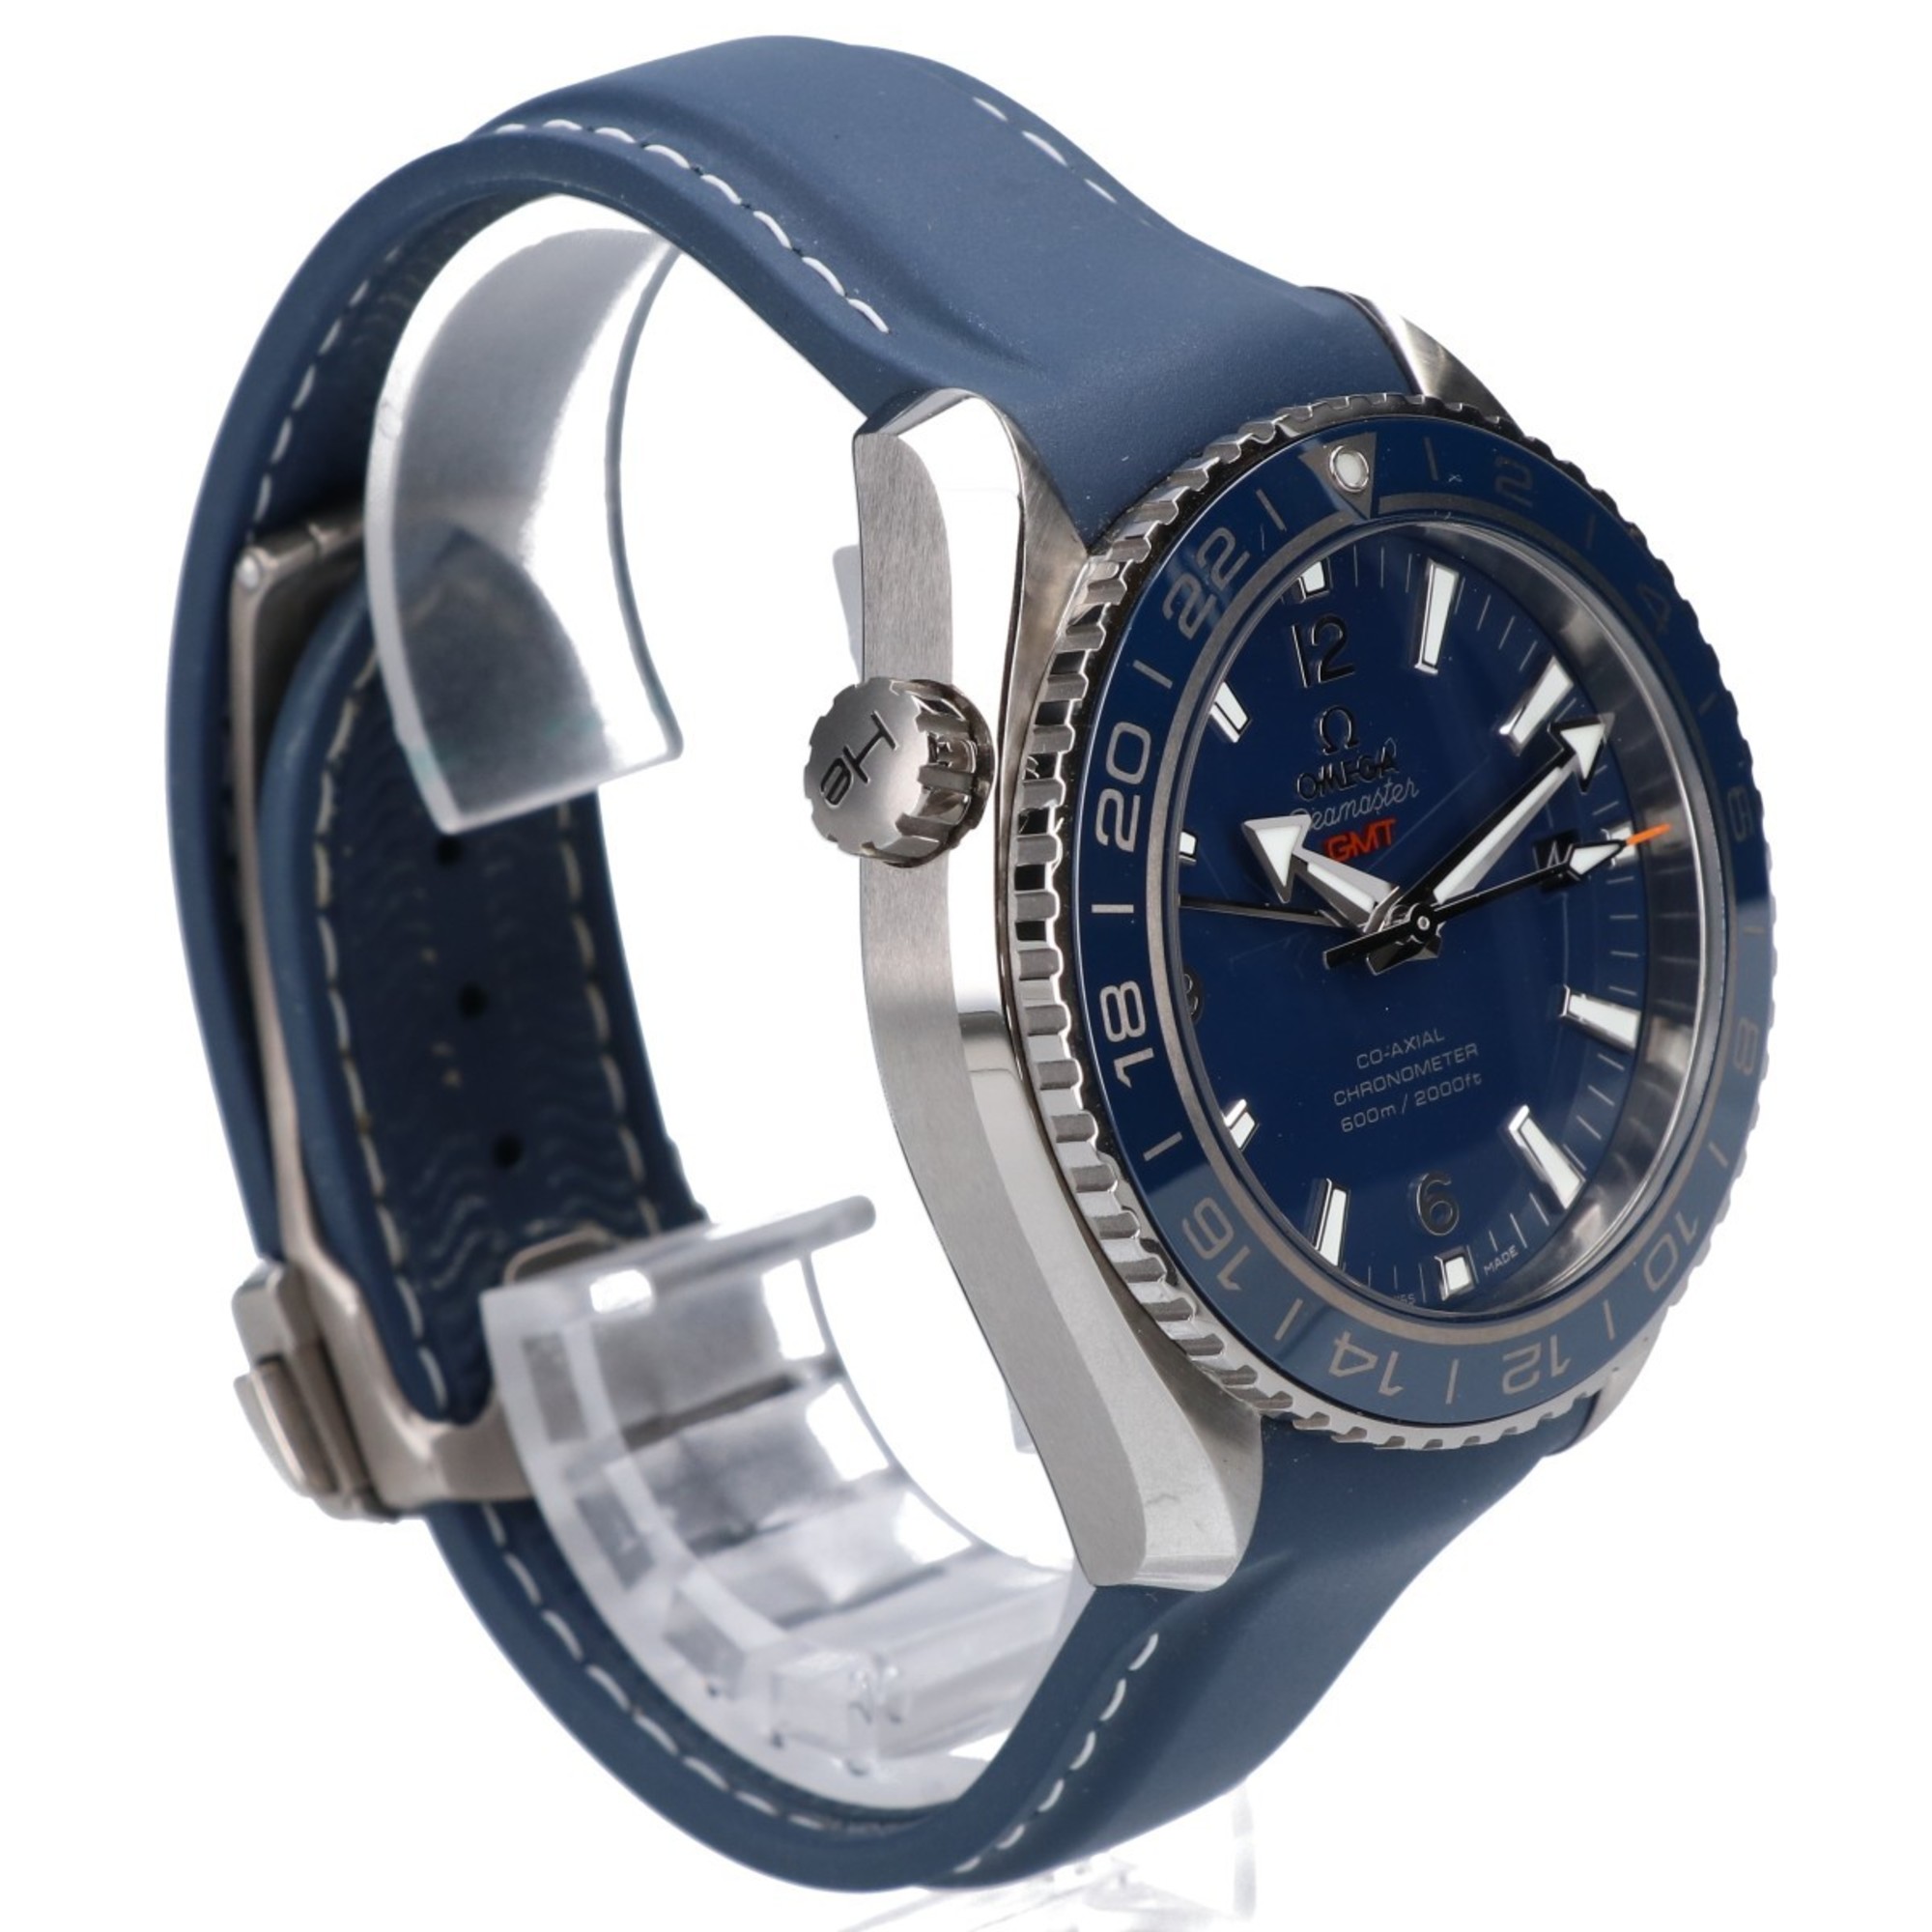 OMEGA 232.92.44.22.03.001 Seamaster Planet Ocean 600m GMT Automatic Watch Silver Navy Rubber Strap Men's